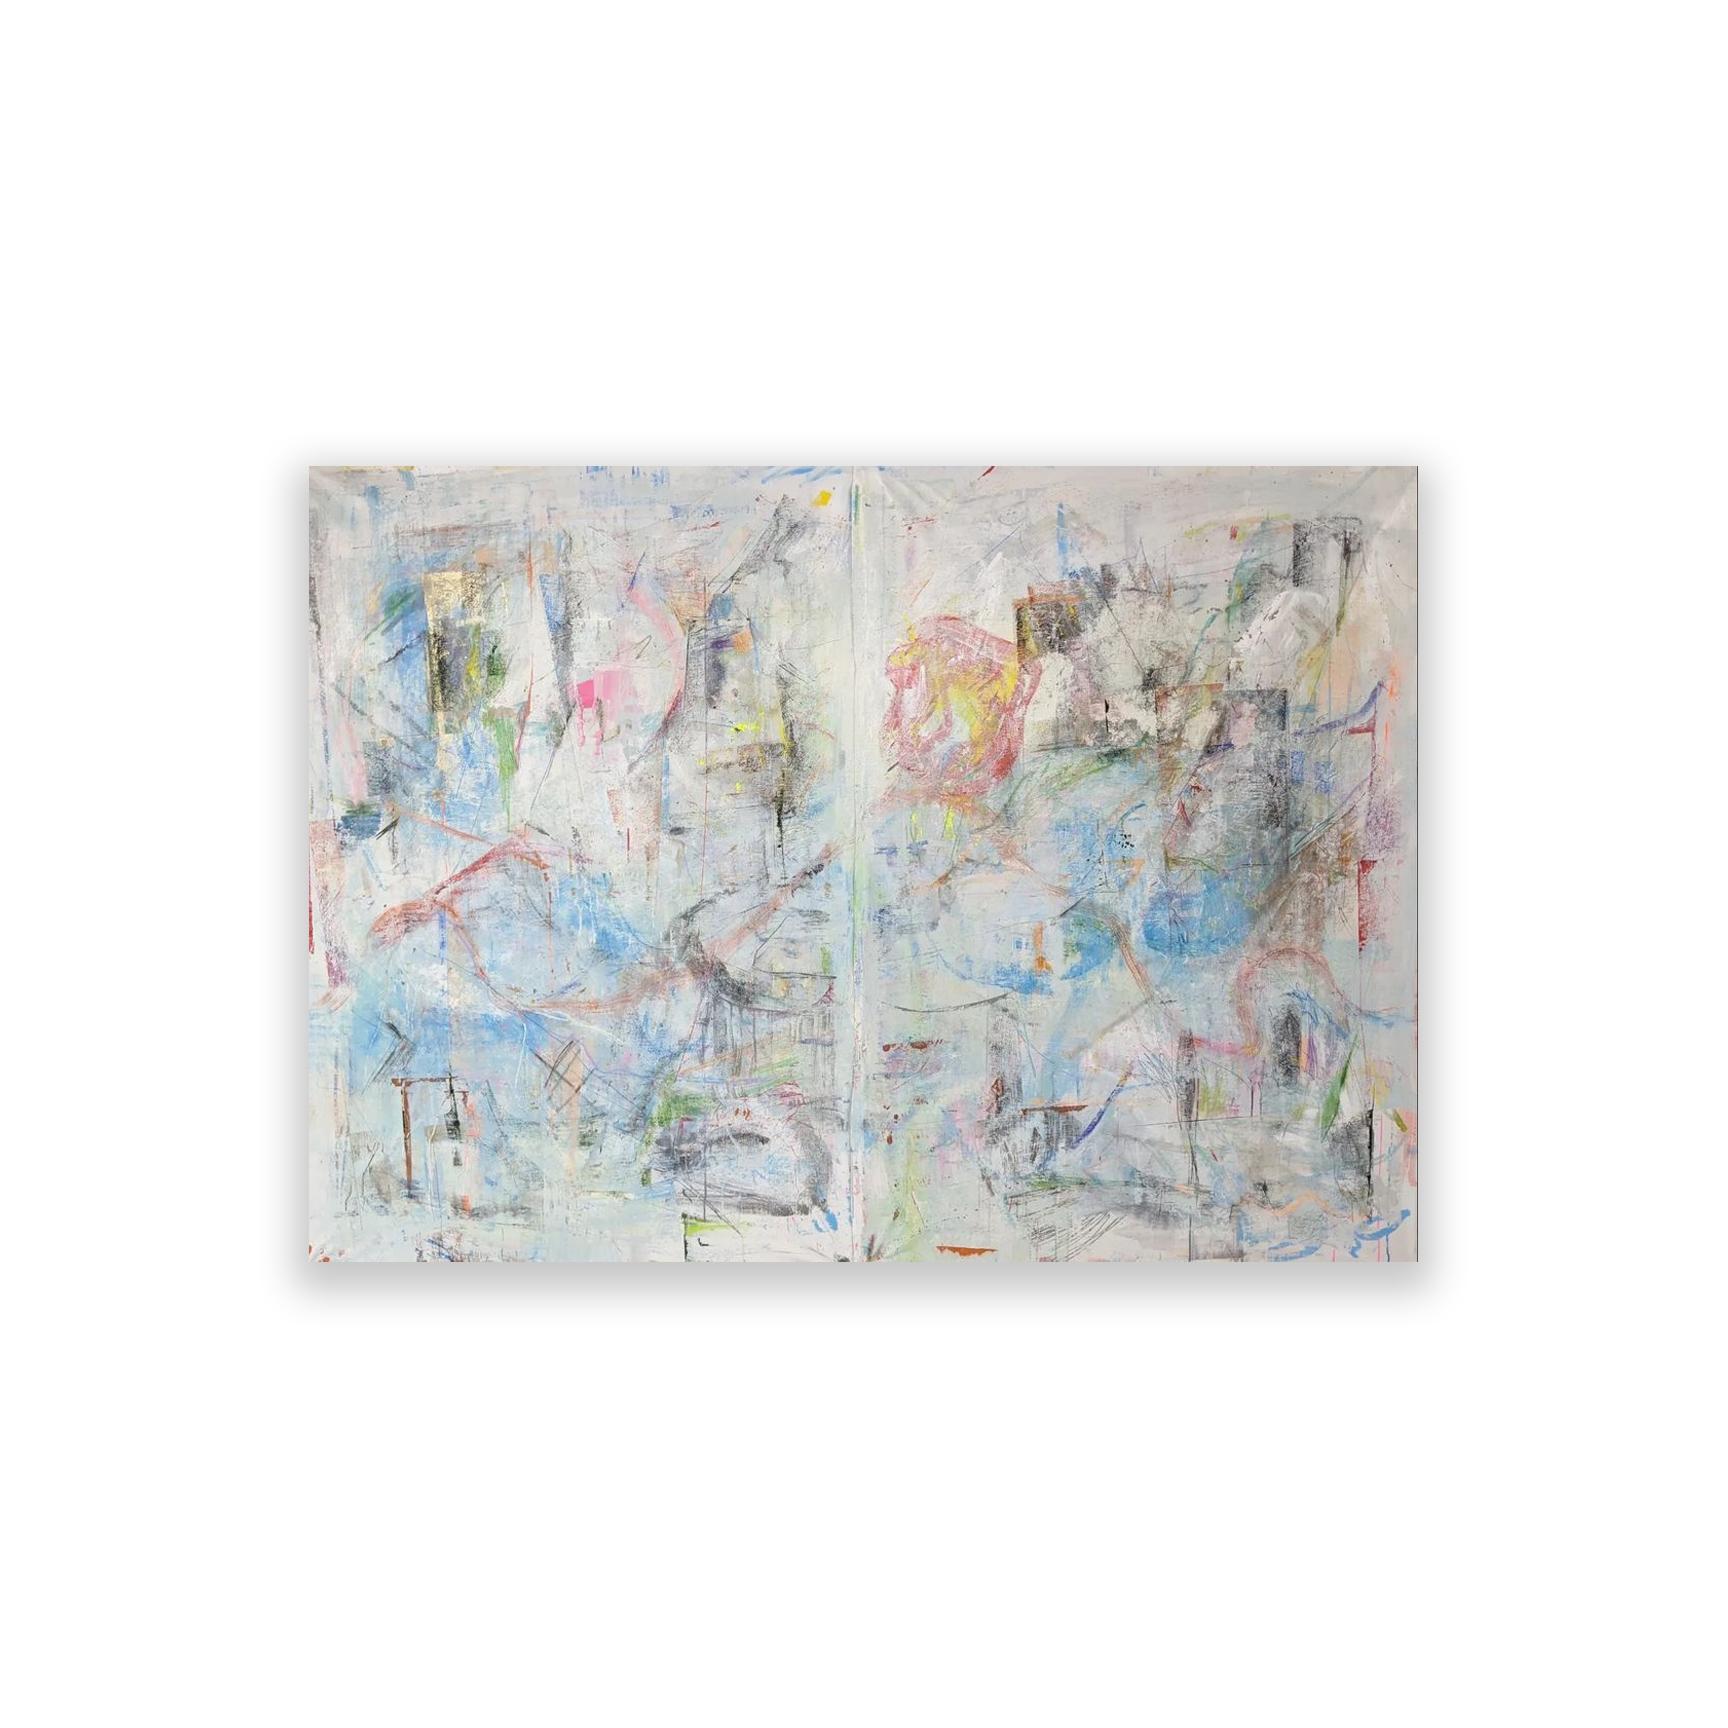 Remote Diptych by Joseph Conrad-Ferm, 2022
Mixed Media 
68 × 92 in 
172.7 × 233.7 cm

Mixed media abstract painting on canvas by NY-based artist Joseph Conrad-Ferm. 

Shipping is not included. See our shipping policies. Please contact us for